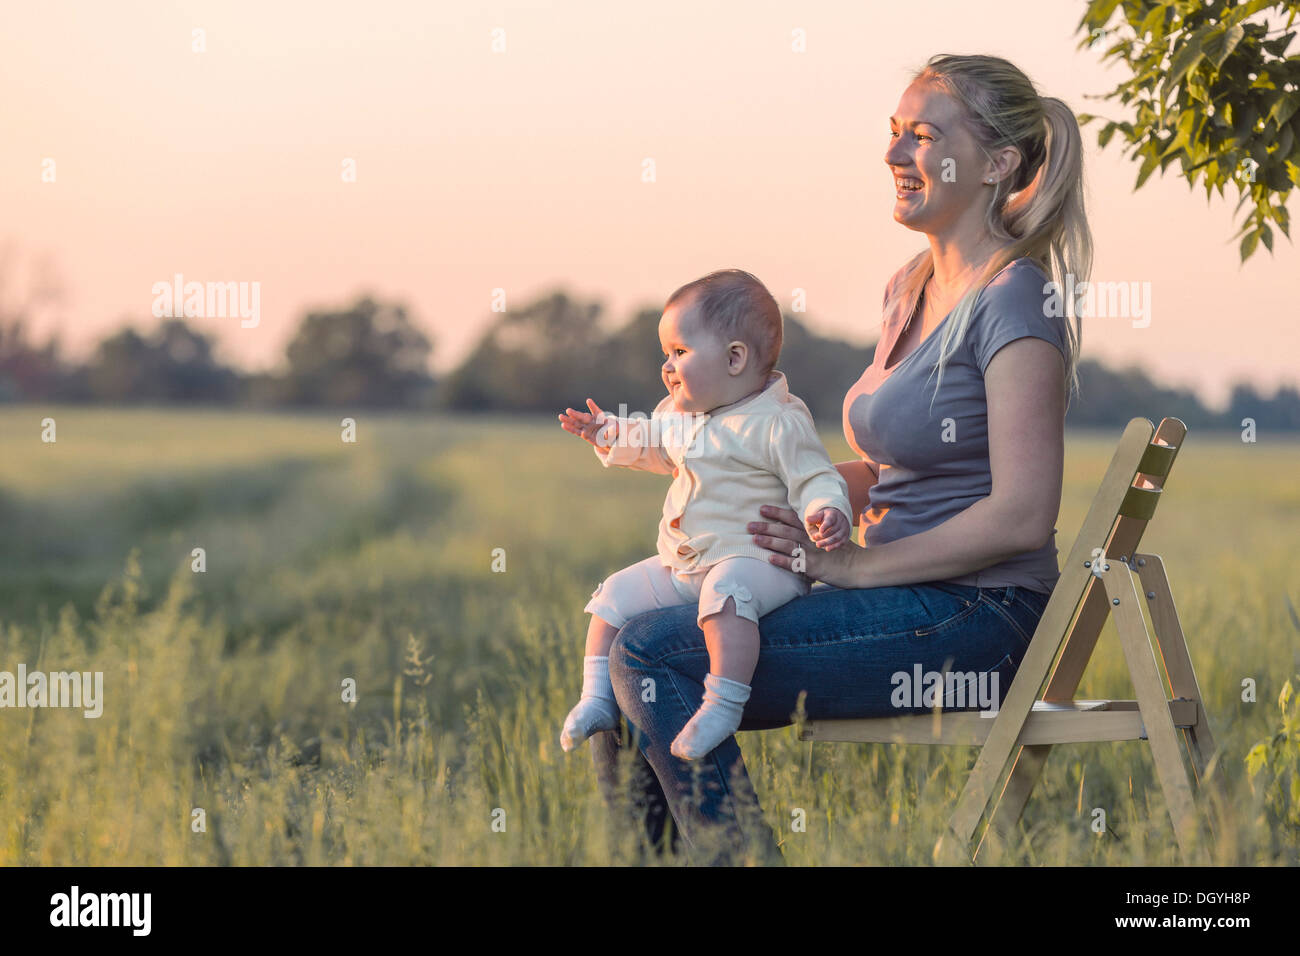 A laughing woman holding her baby while sitting on a chair in a field Stock Photo